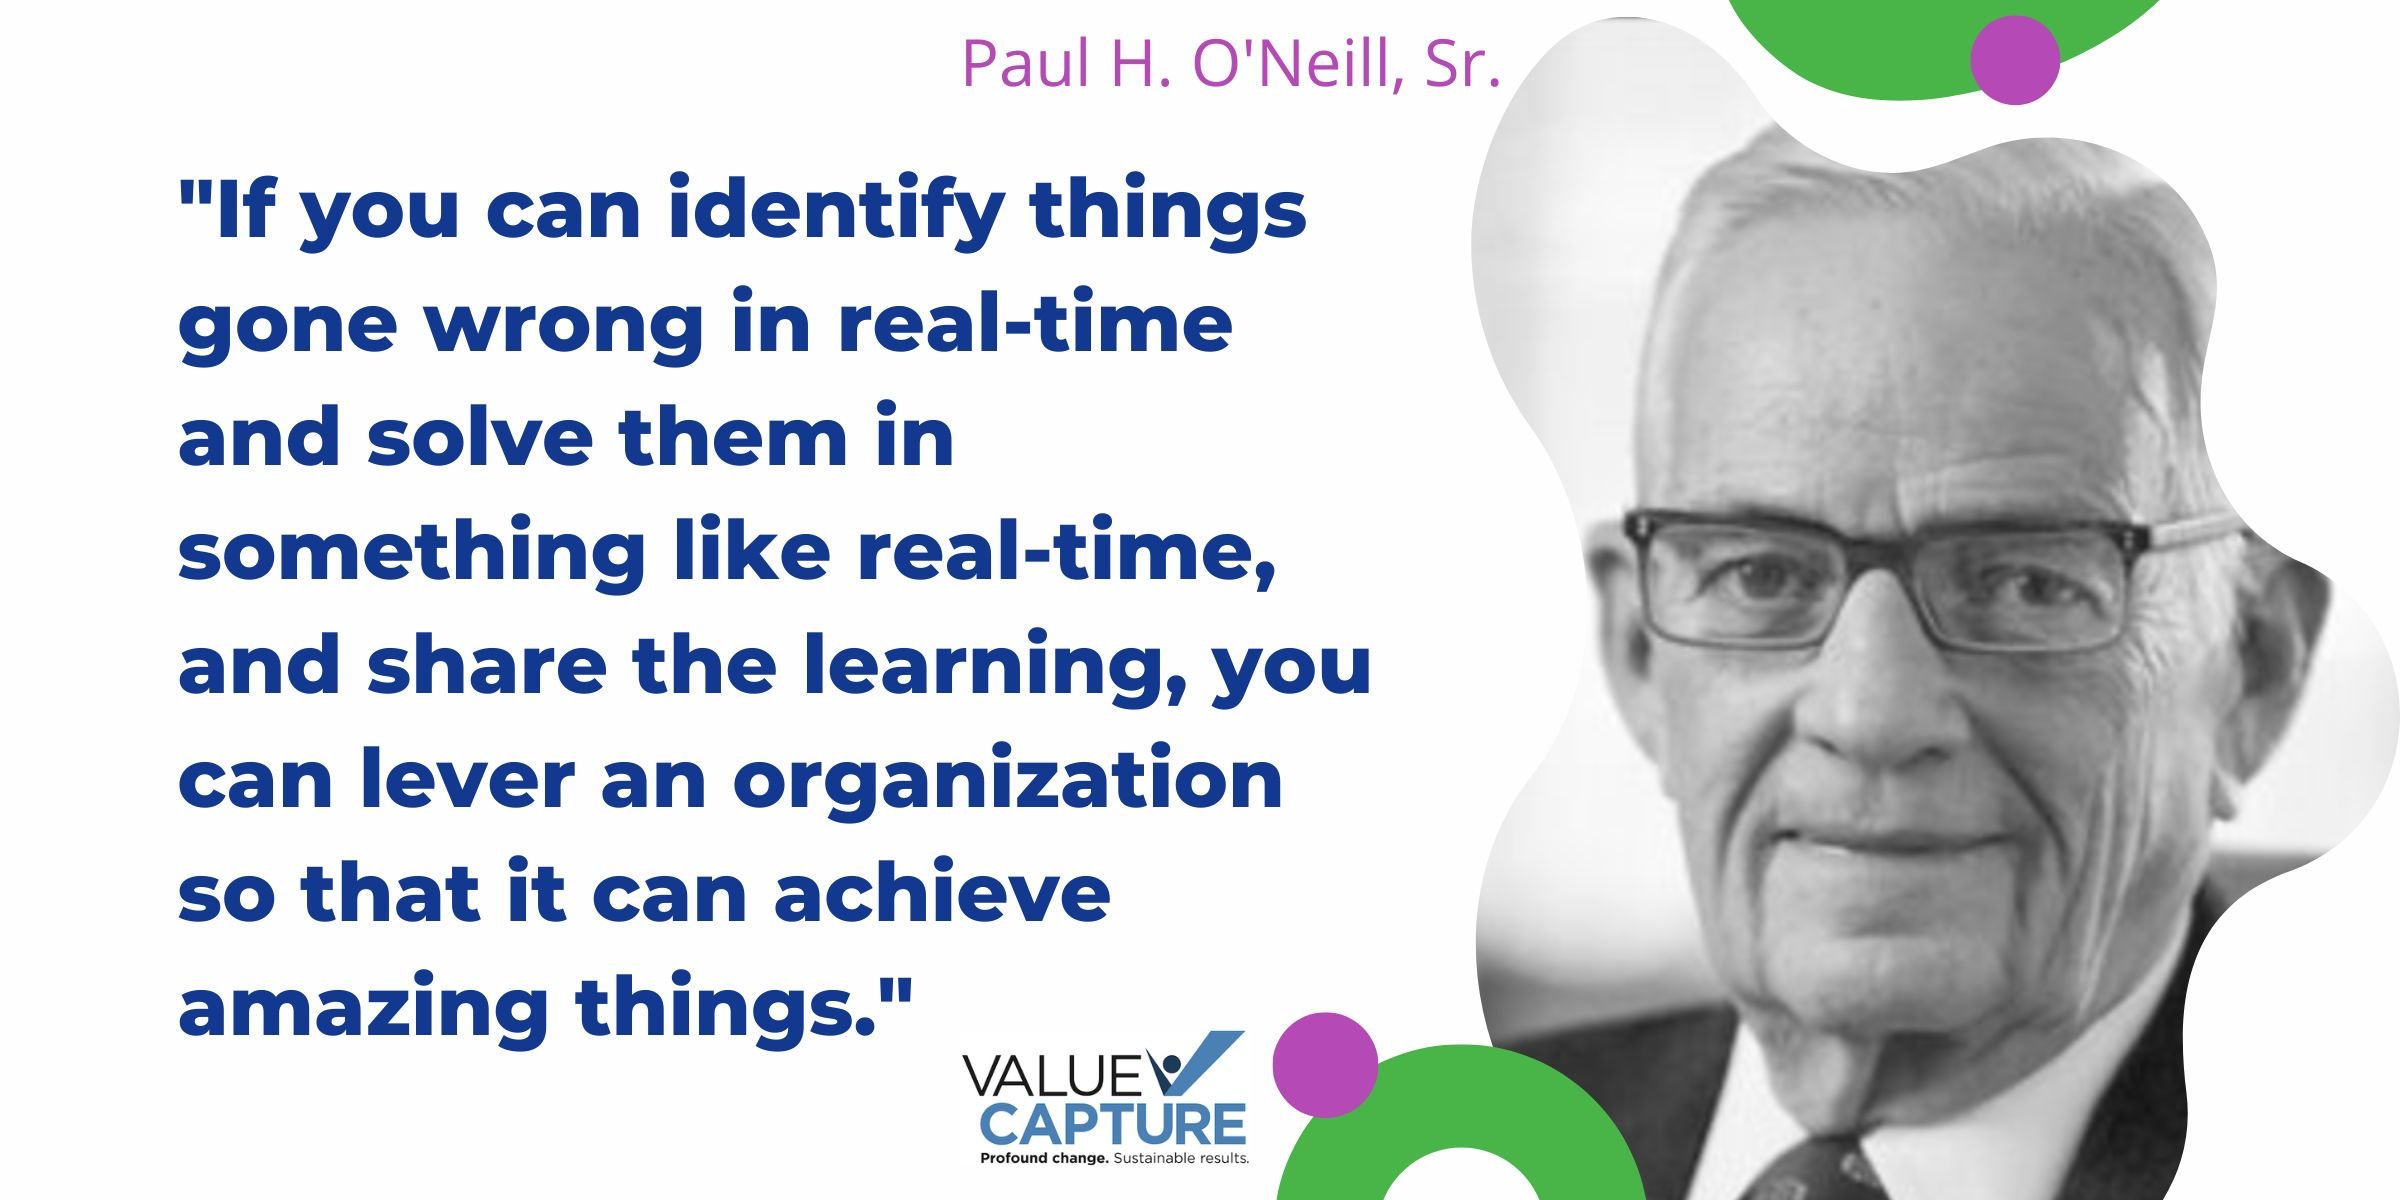 "If you can identify things gone wrong in real-time and solve them in something like real-time, and share the learning, you can lever an organization so that it can achieve amazing things." paul o'neill